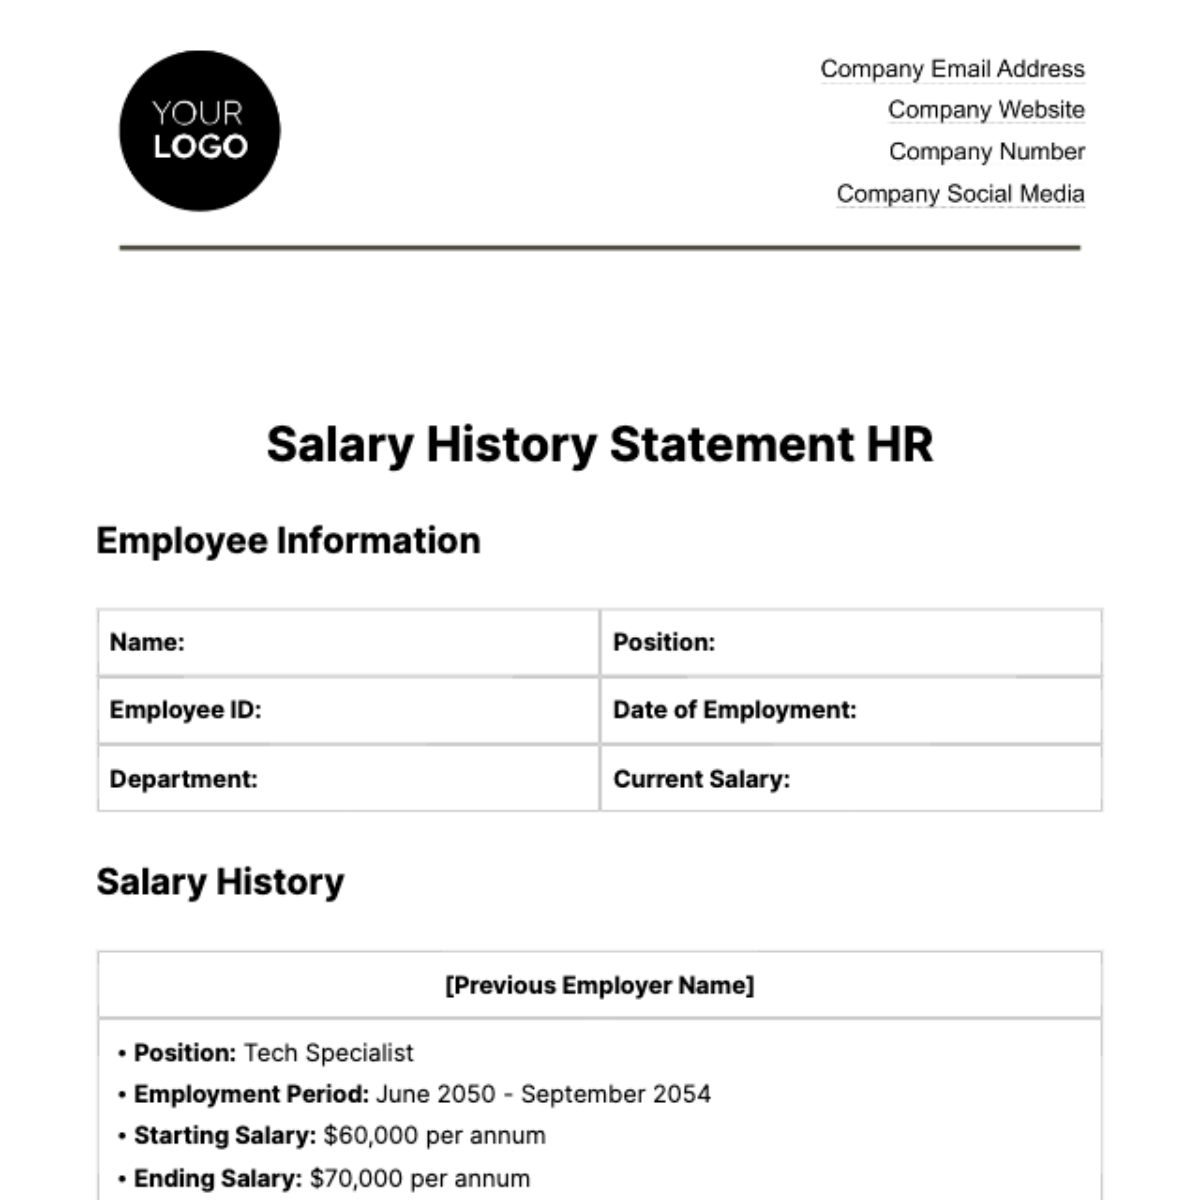 Salary History Statement HR Template